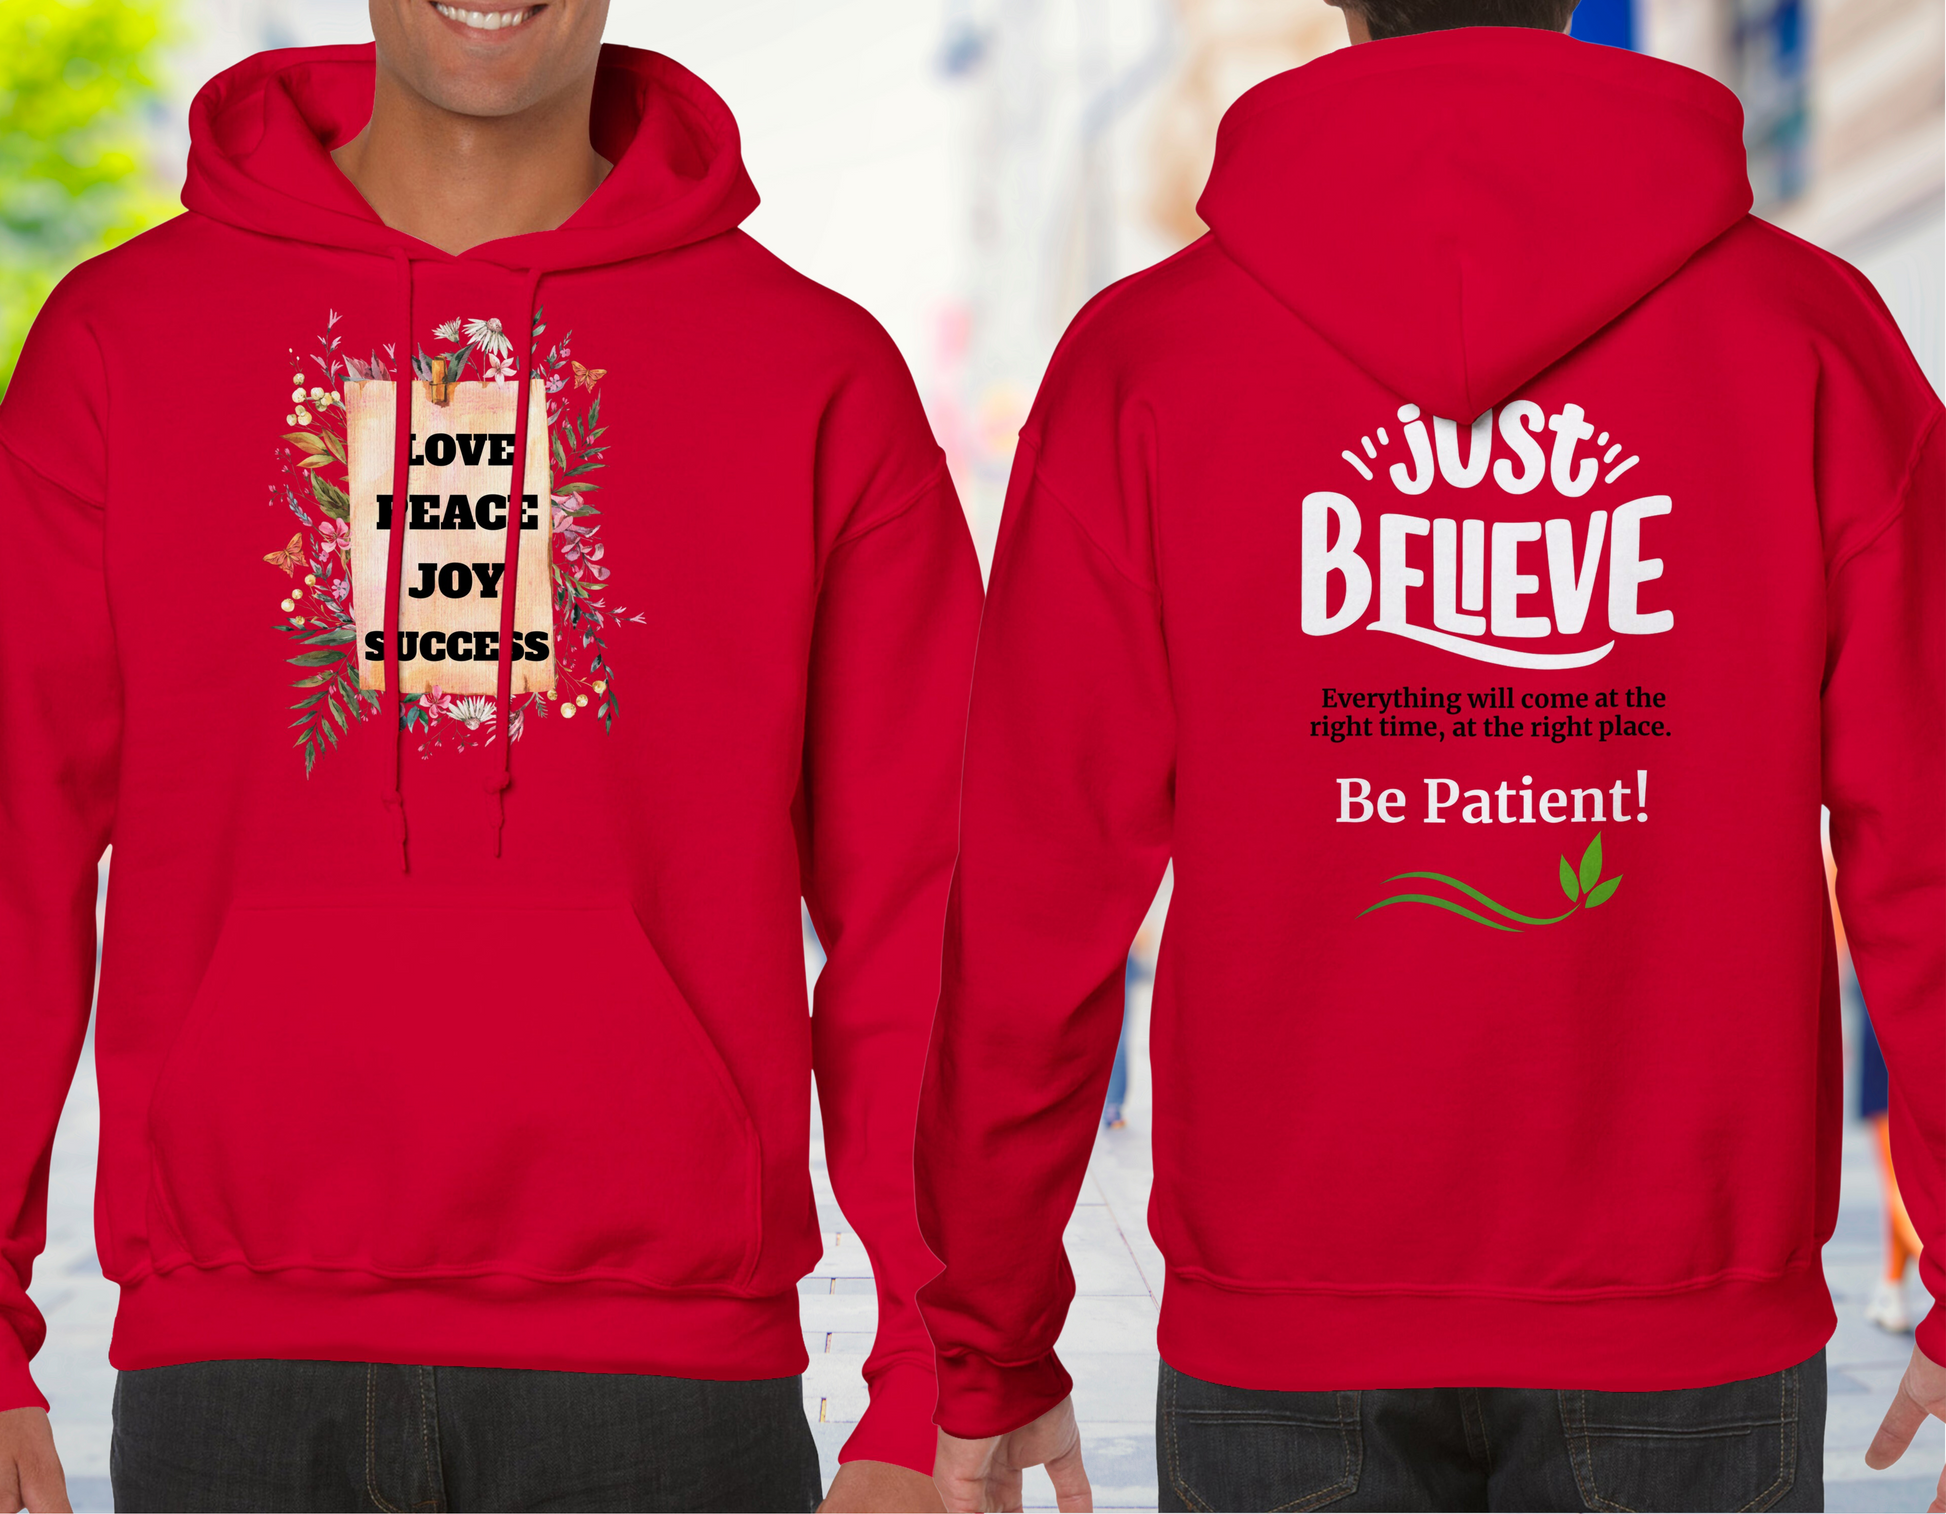 Cottagecore Unisex Hoddie, with positive Words: Love, Peace, Joy and Success. In the back: Just Believe everything will come at the right time and the right place. Be patient!Positive Quote Top, Vintage Jumper Gift Idea - red hoodie